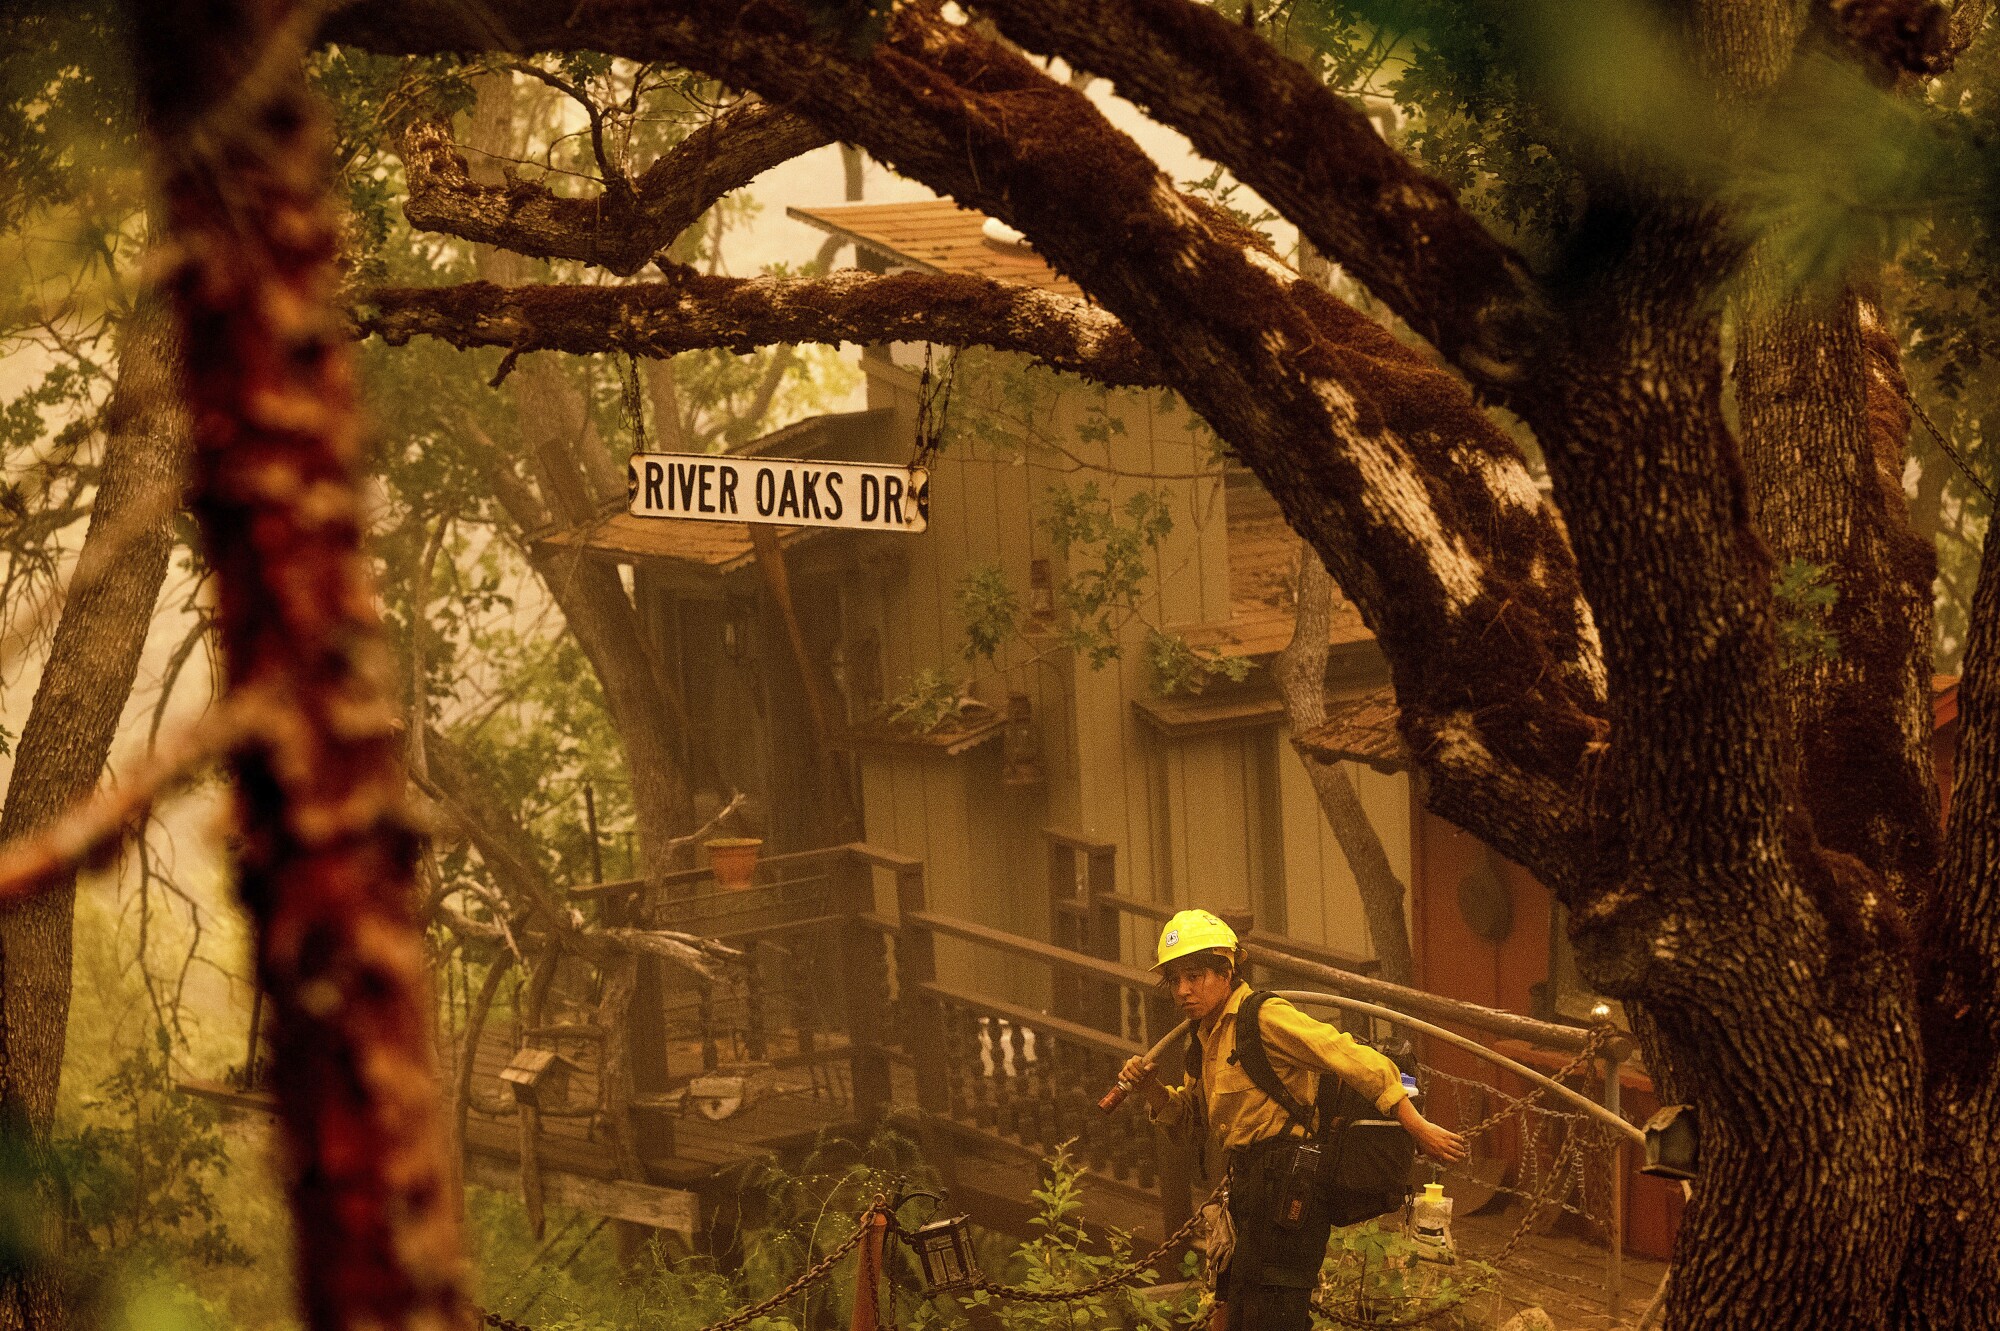 A firefighter battling the McKinney fire protects a cabin in Klamath National Forest.